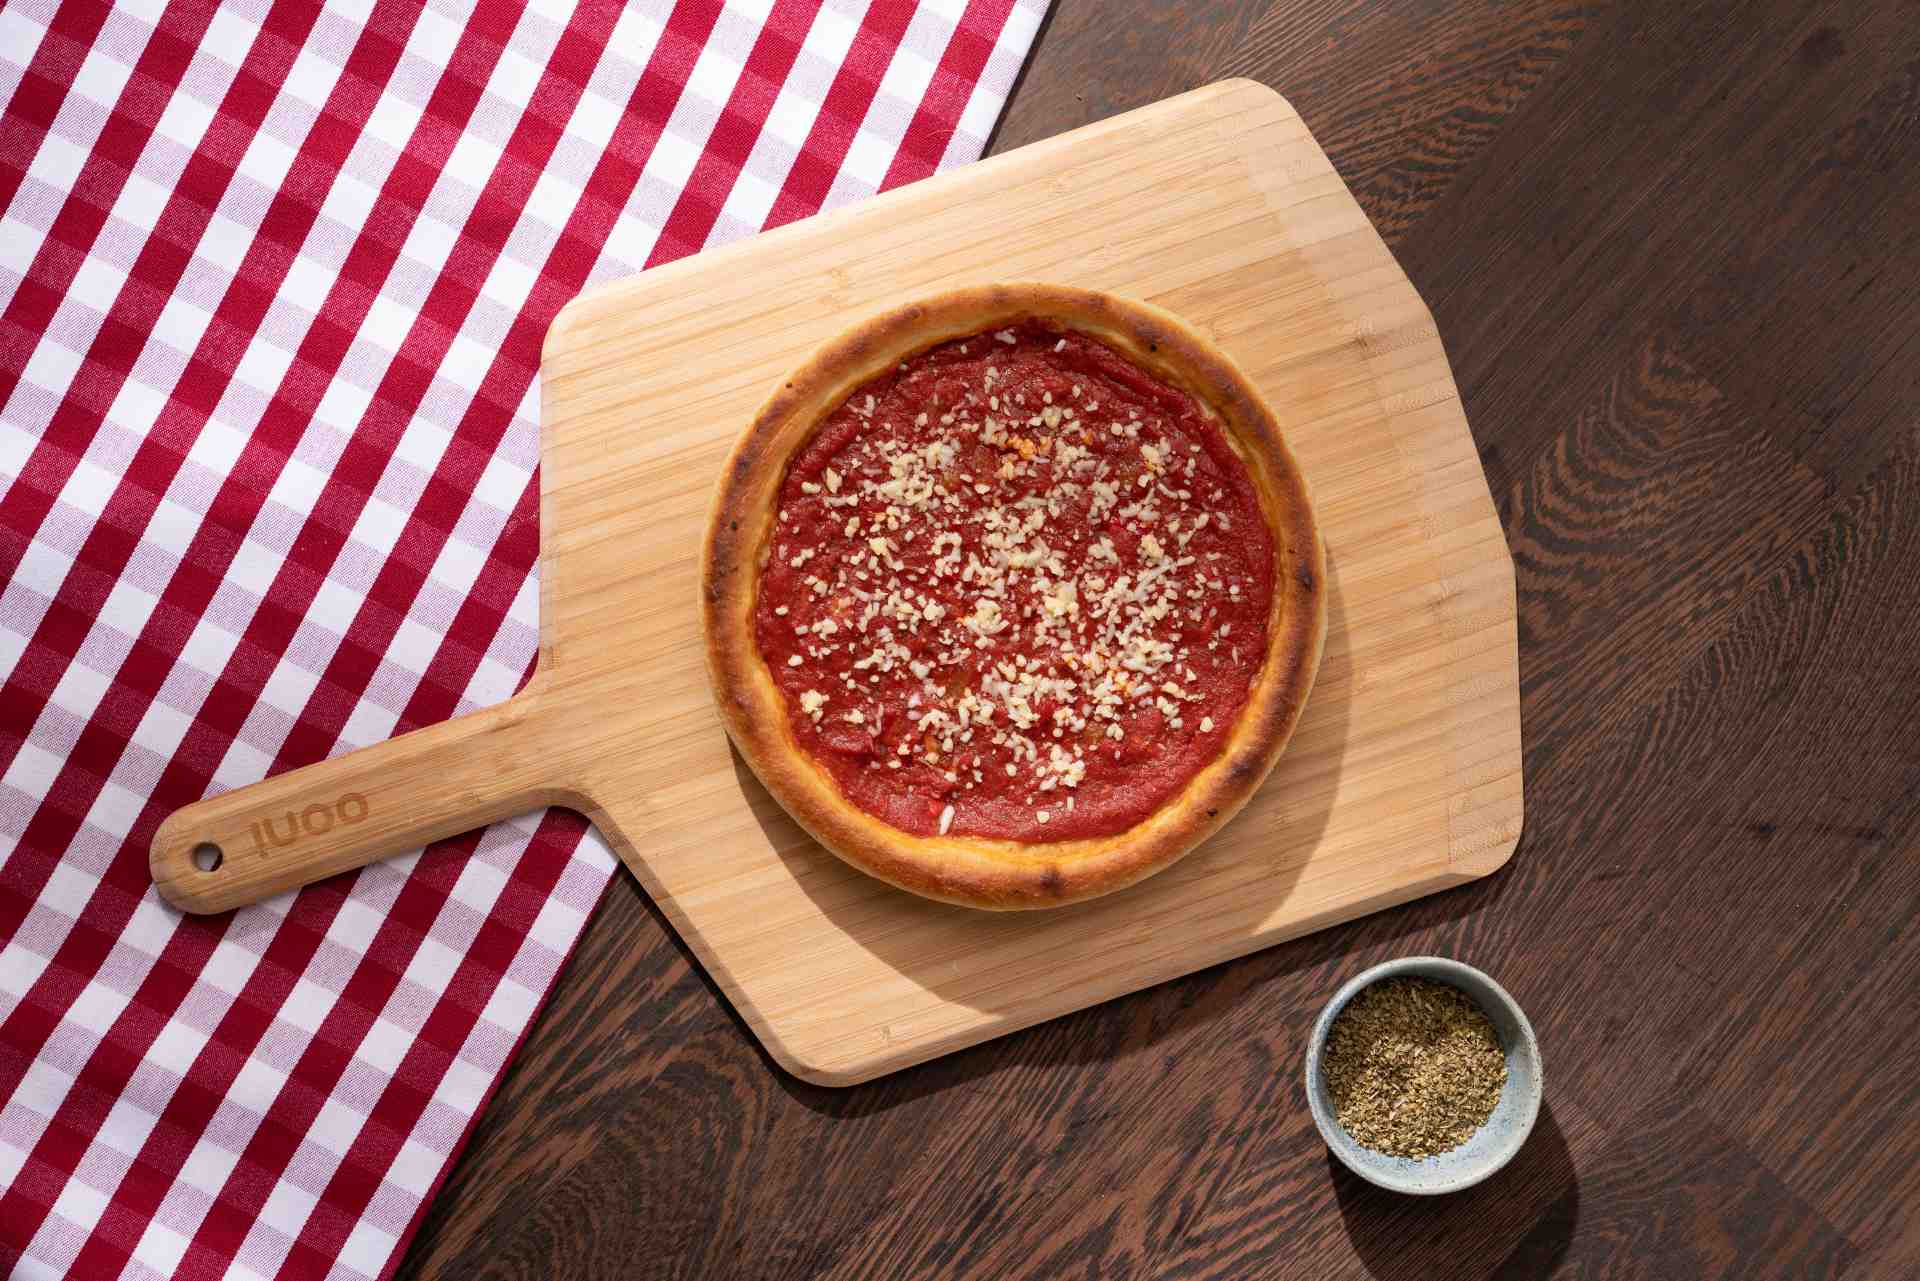 Chicago deep-dish pizza with tomato sauce and shredded mozzarella on an Ooni Bamboo Pizza Peel & Serving Board next to a bowl of oregano.